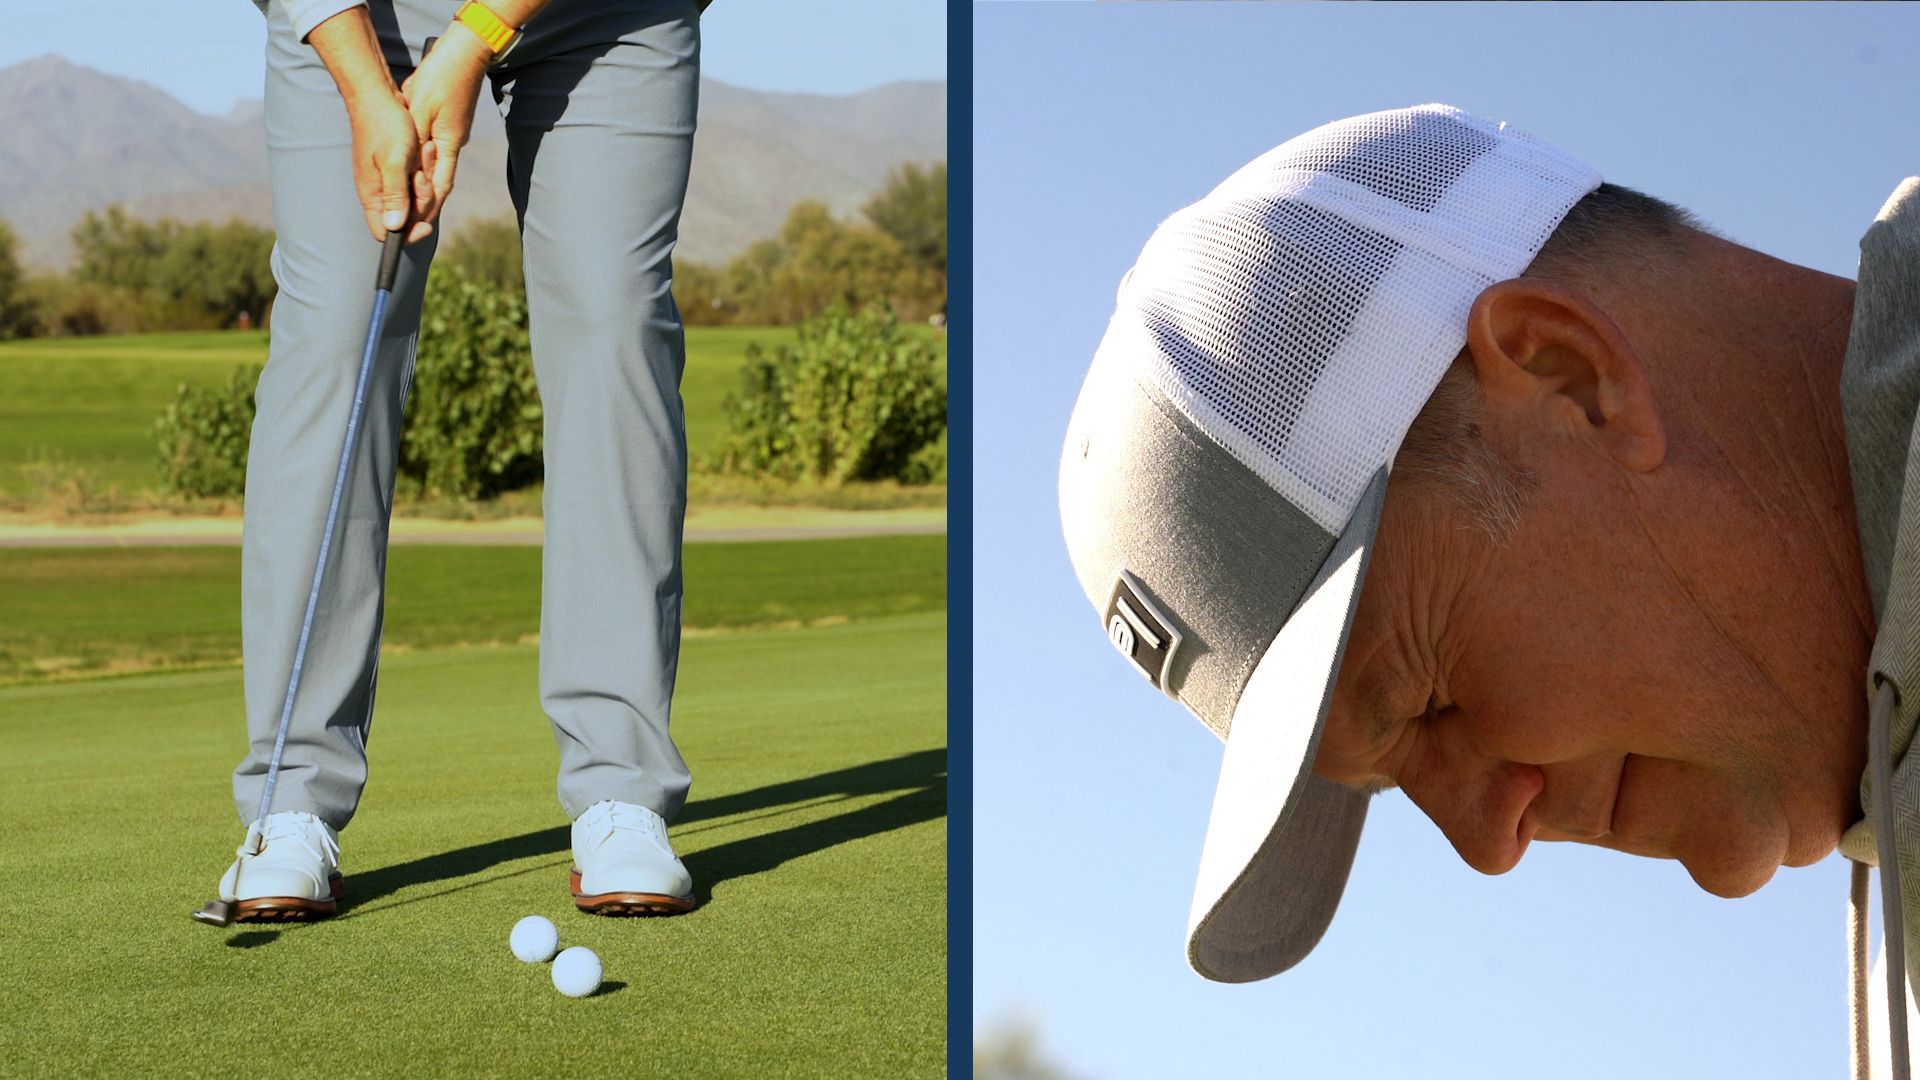 Try this calibration drill for better distance control and putting accuracy